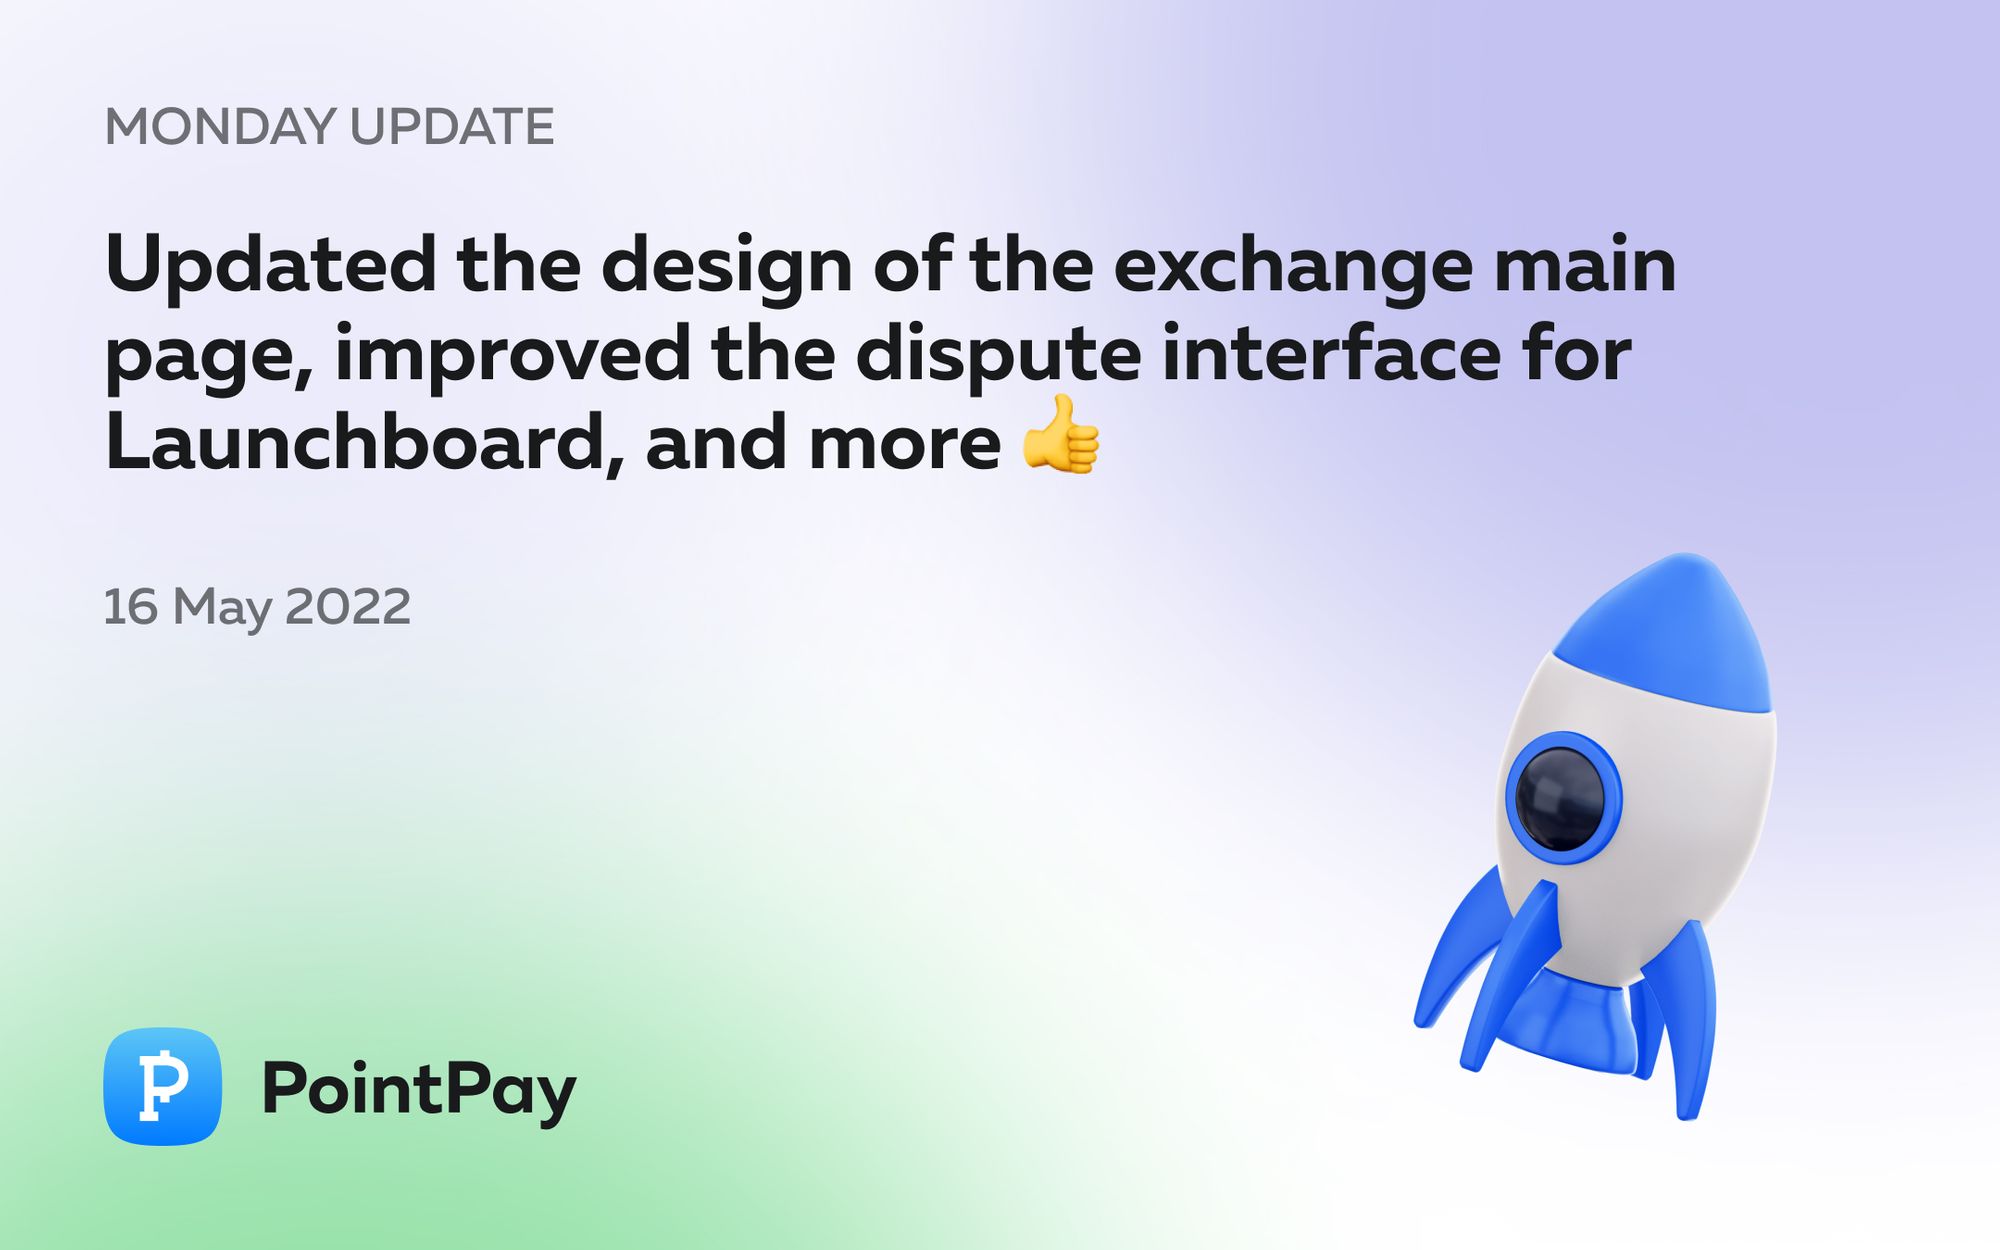 Monday update from PointPay